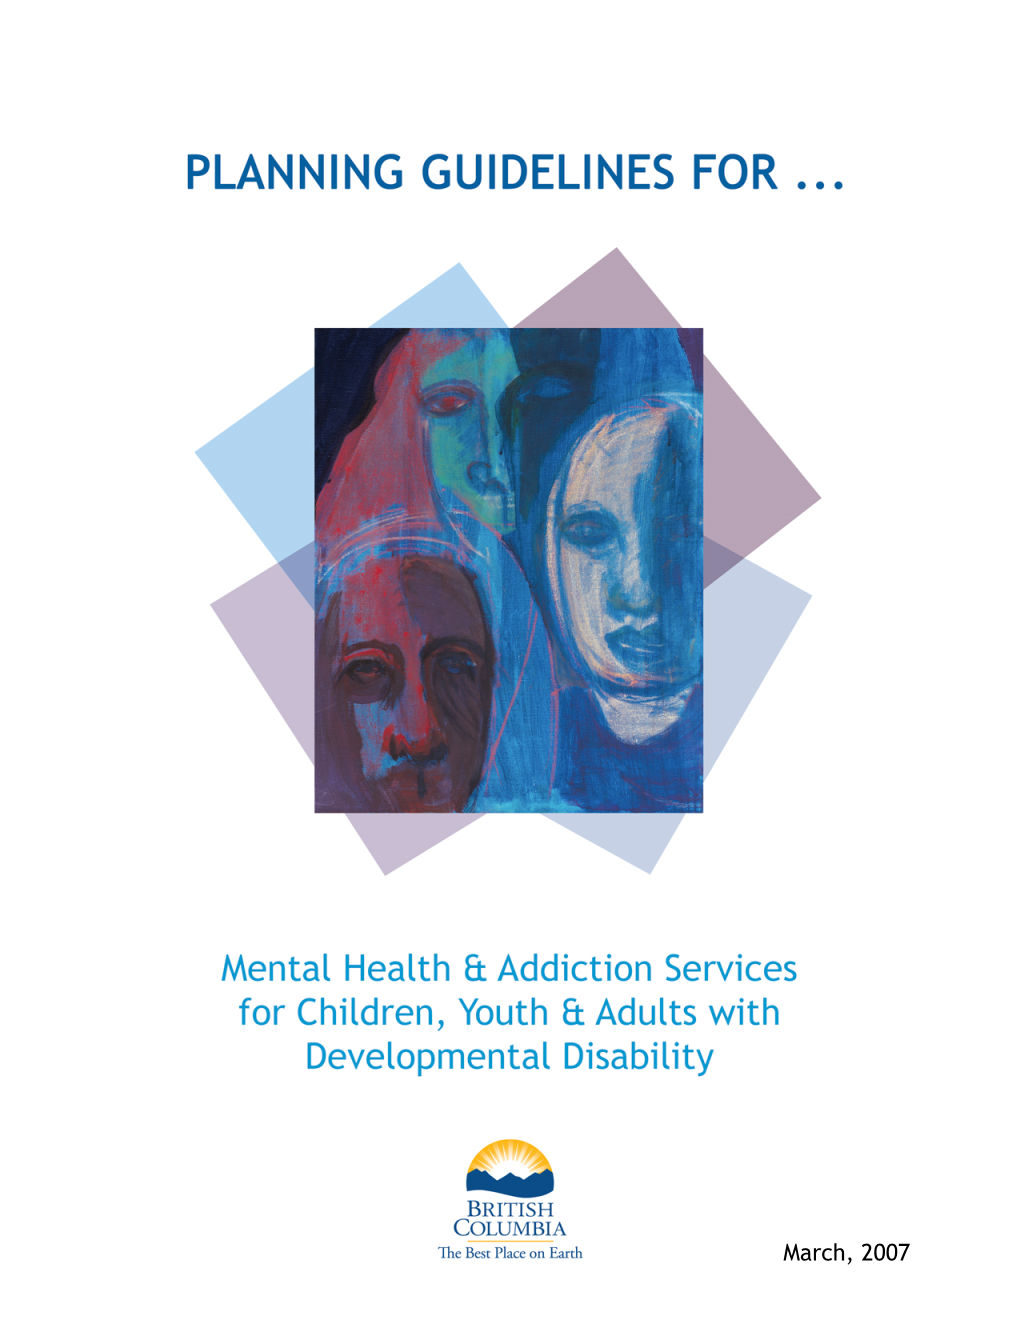 Planning Guidelines for Mental Health and Addictions Services For